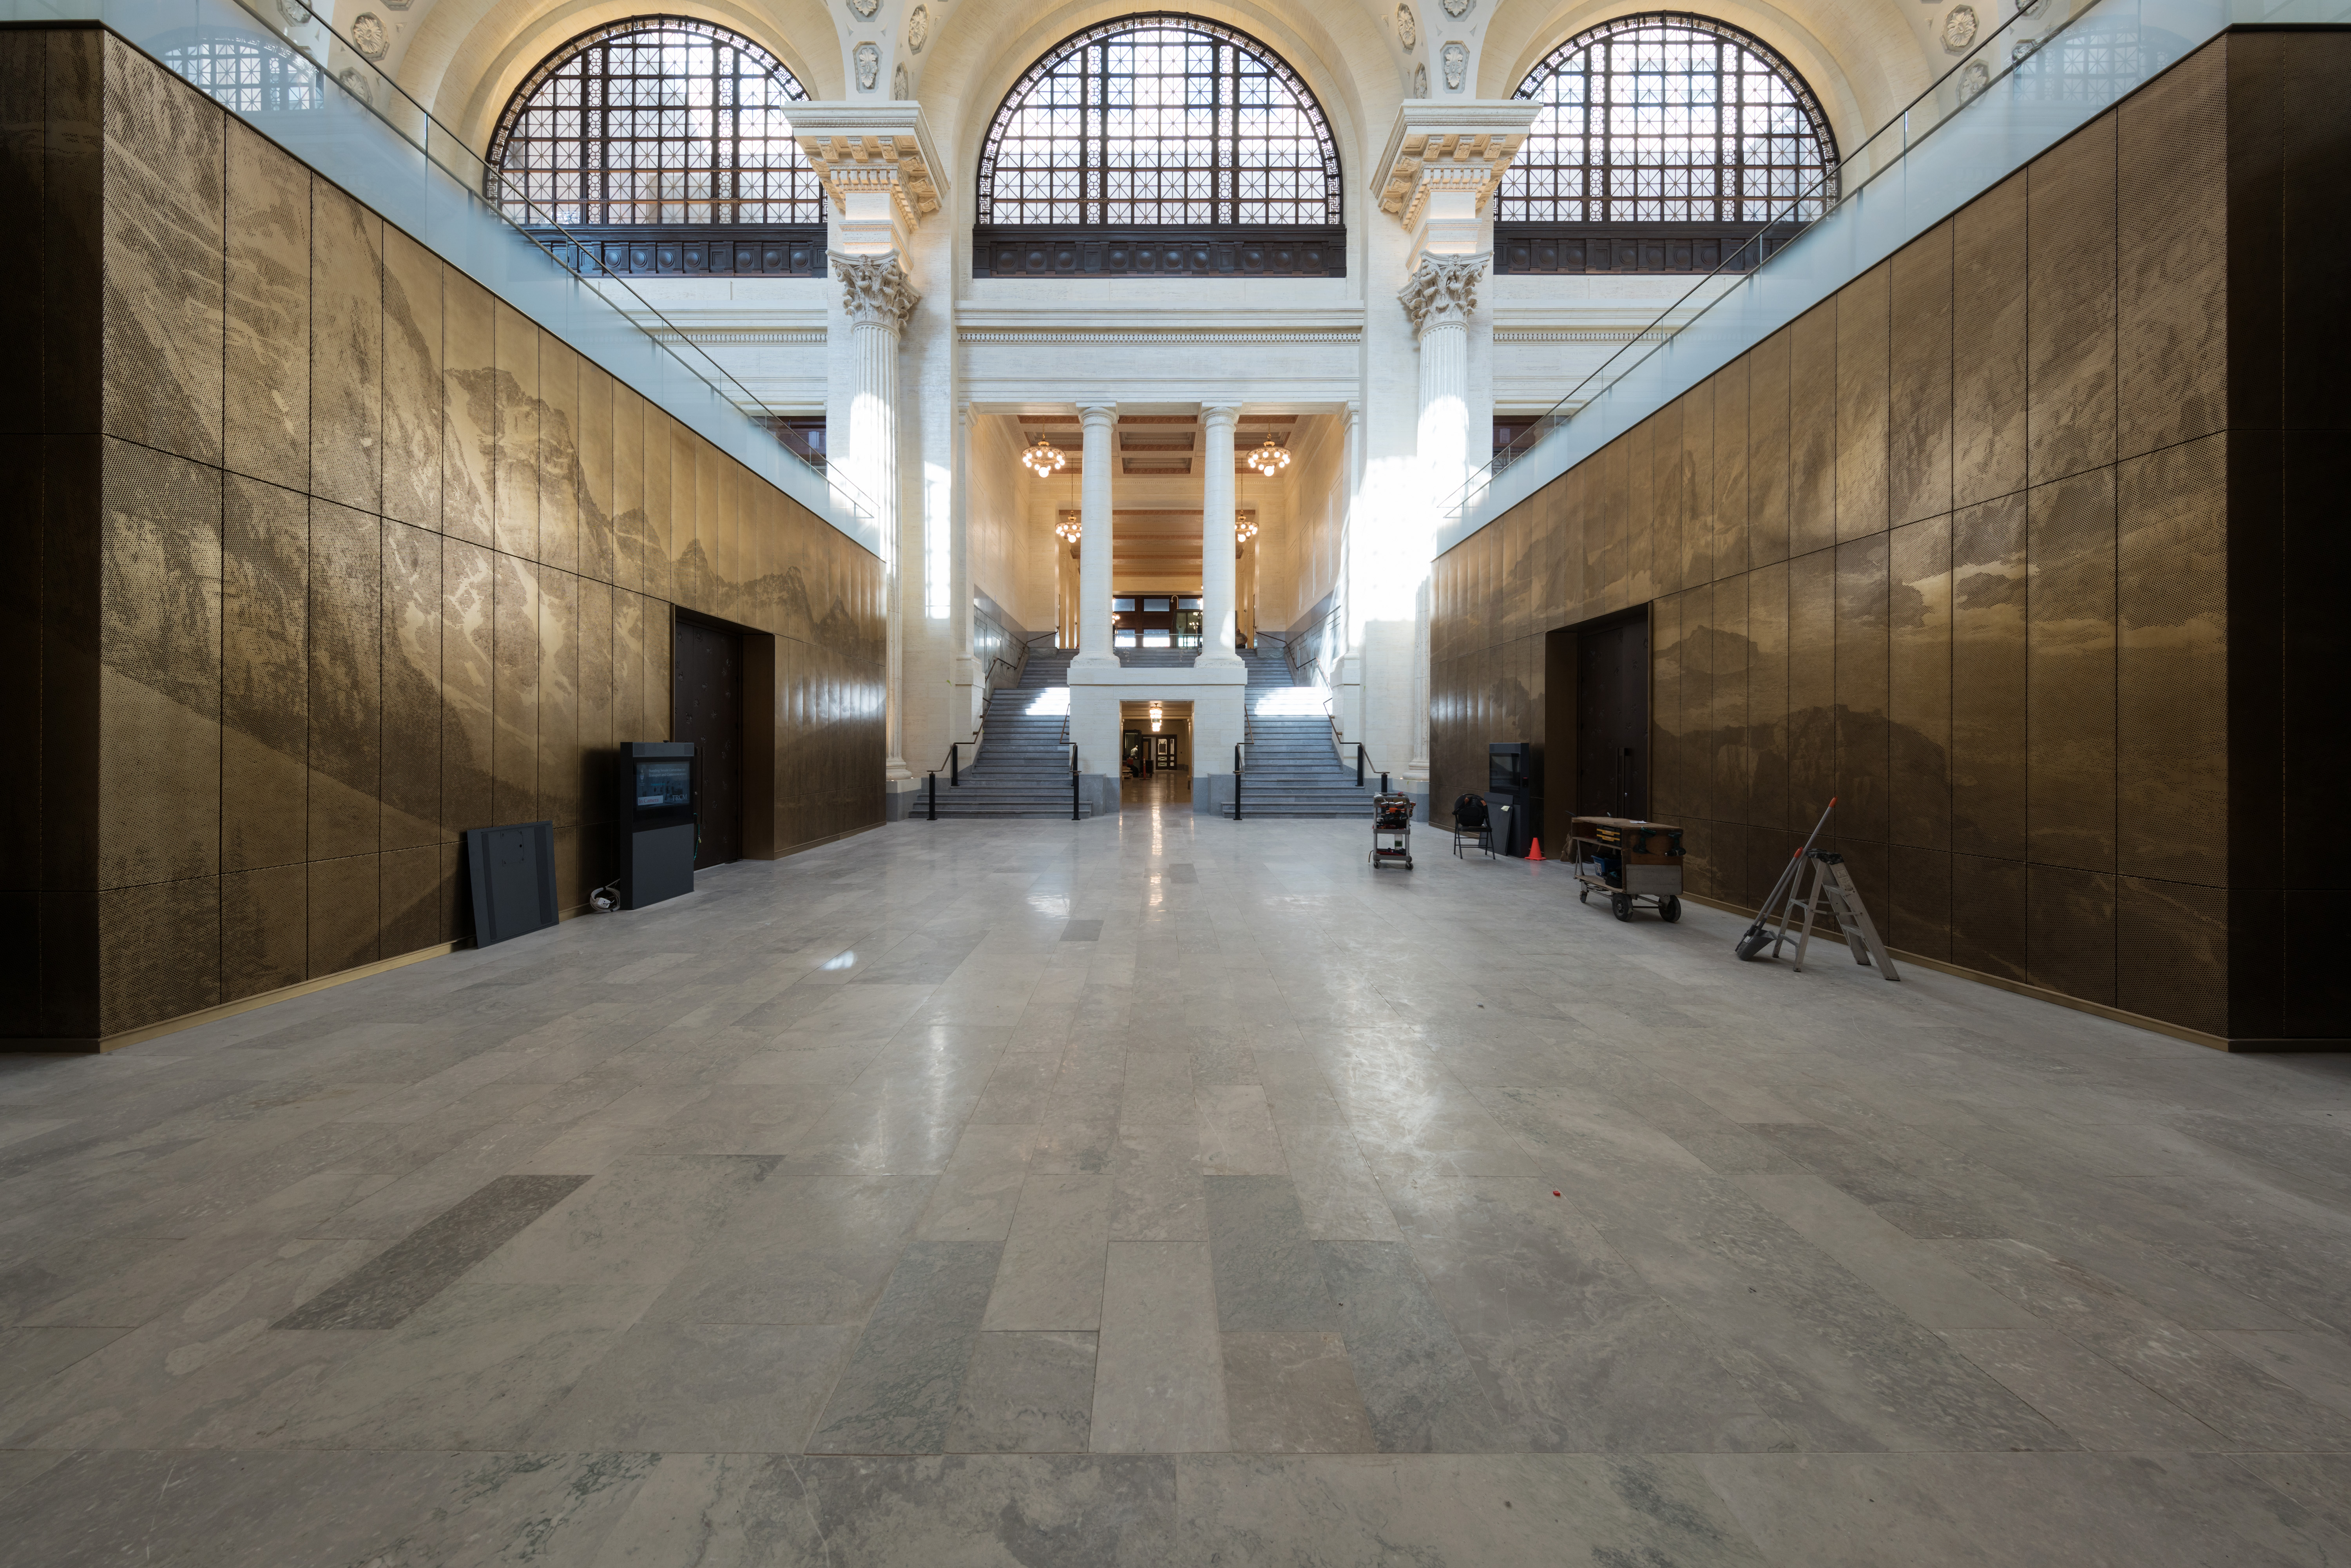 2018 - The finished room. The staircase is restored. There are two committee rooms on each side of the space covered with perforated bronze panels representing east and west sceneries. The floor is original marble.